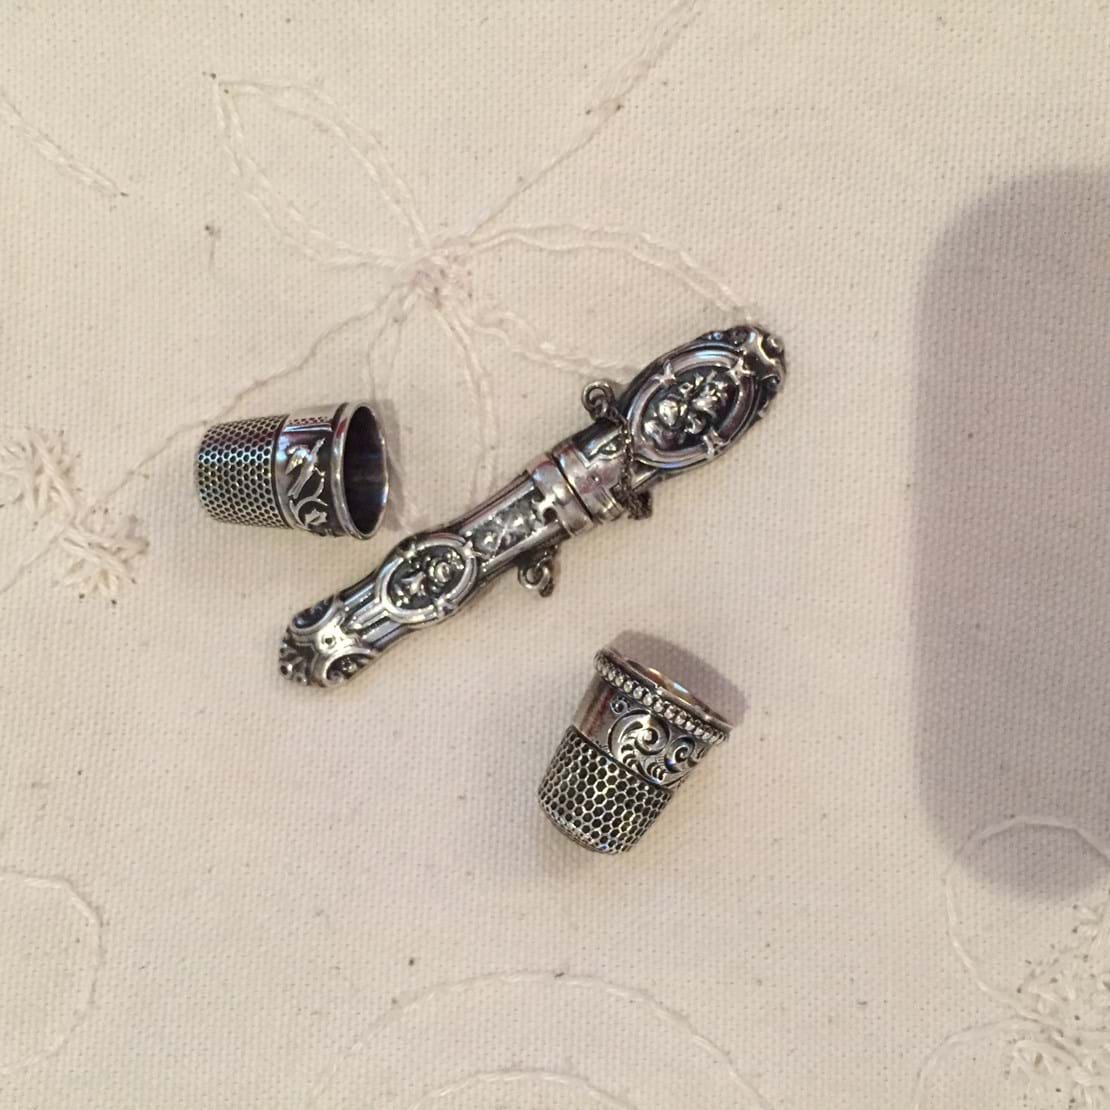 Some of my buys - two beautiful antique sterling silver thimbles and a needle case